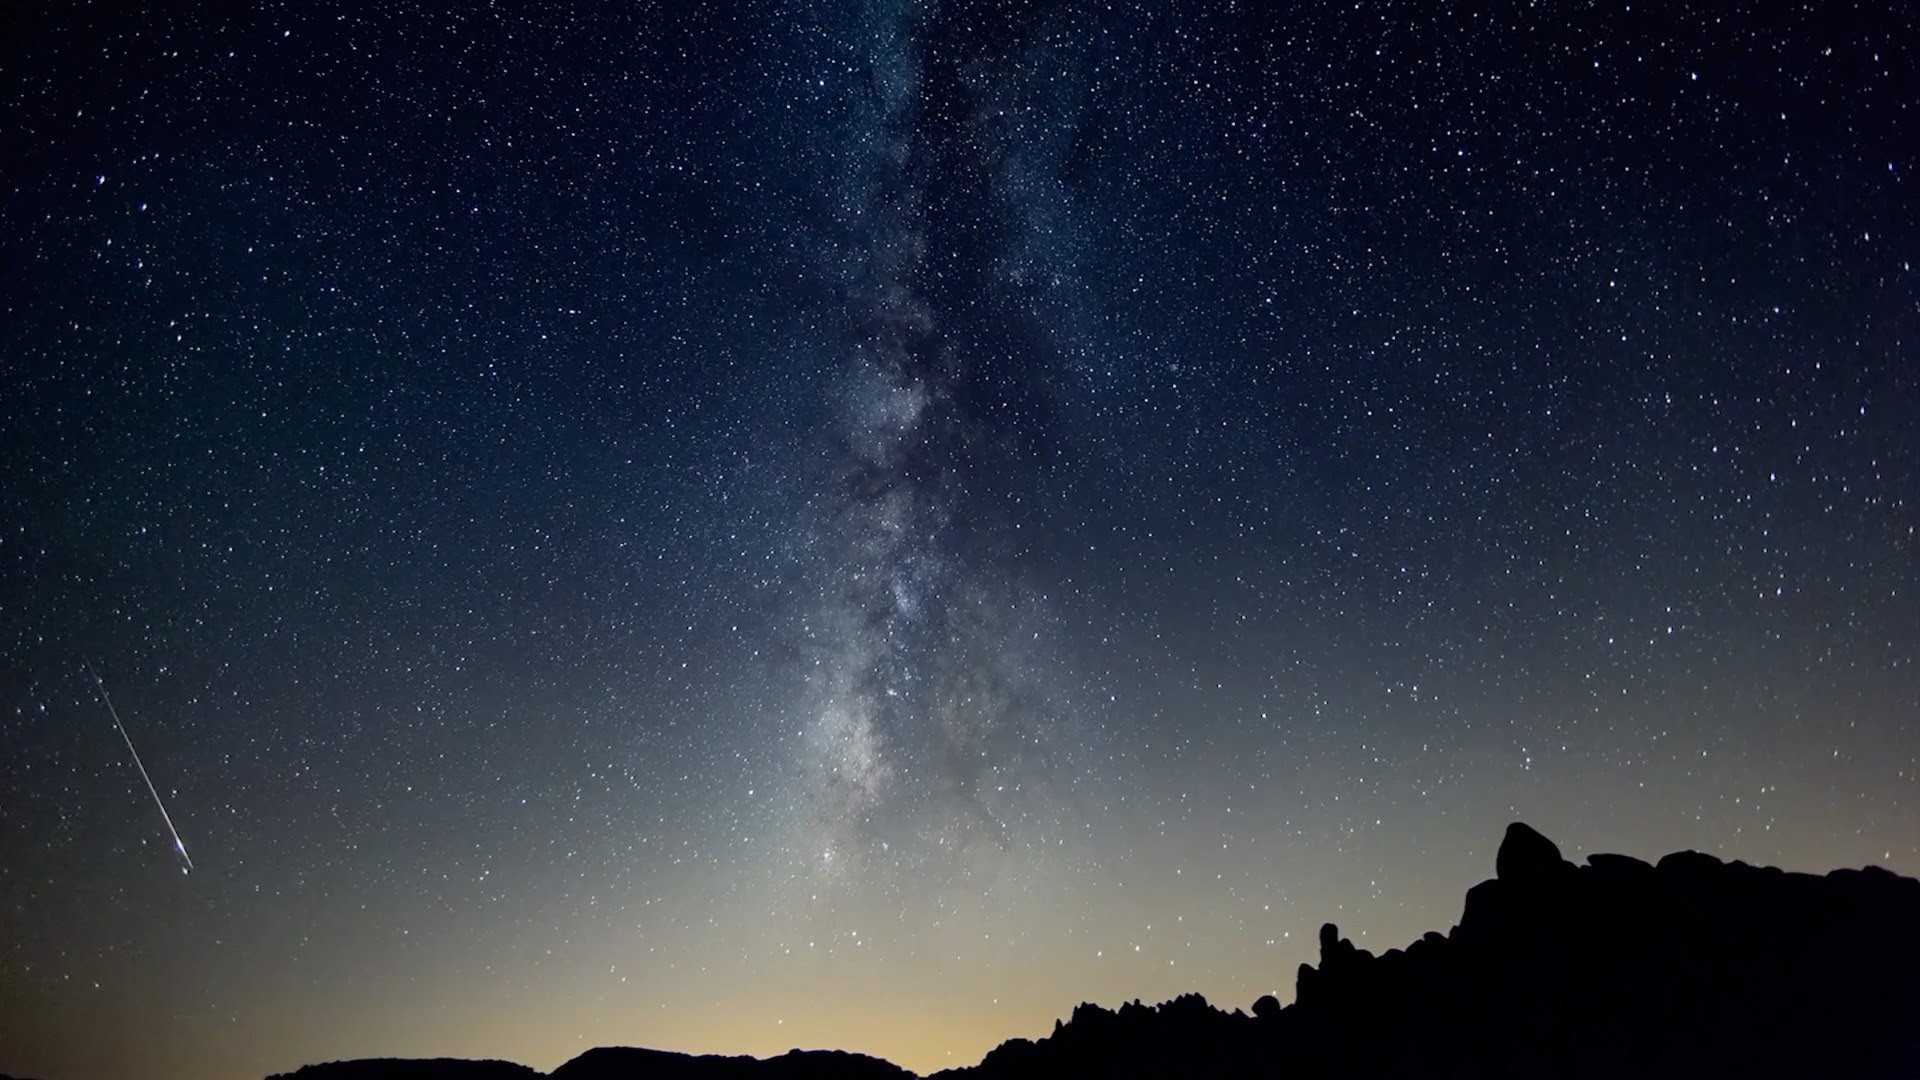 1920x1080 Joshua Tree during the 2013 Perseid Meteor Shower